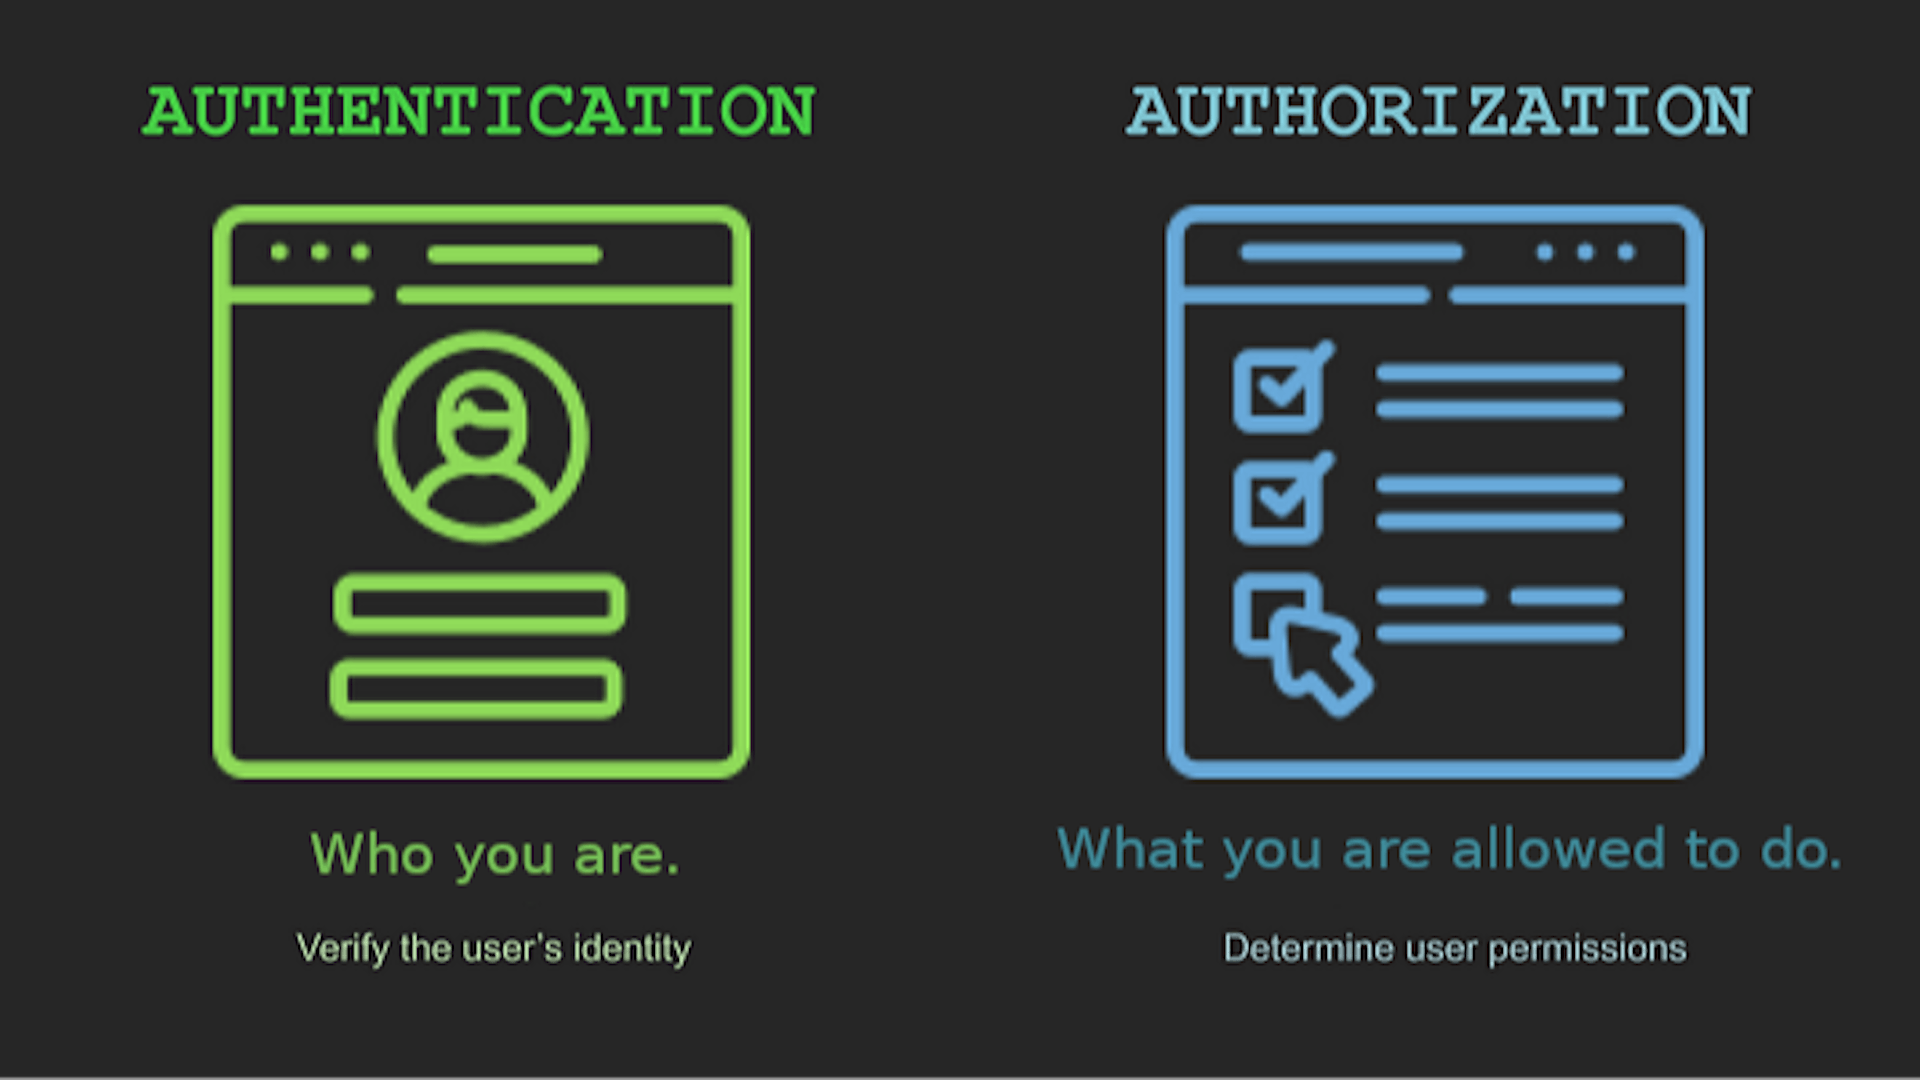 Authentication and Authorization (source: Jeffrey Marvin Forones|Geek Culture. Modified)